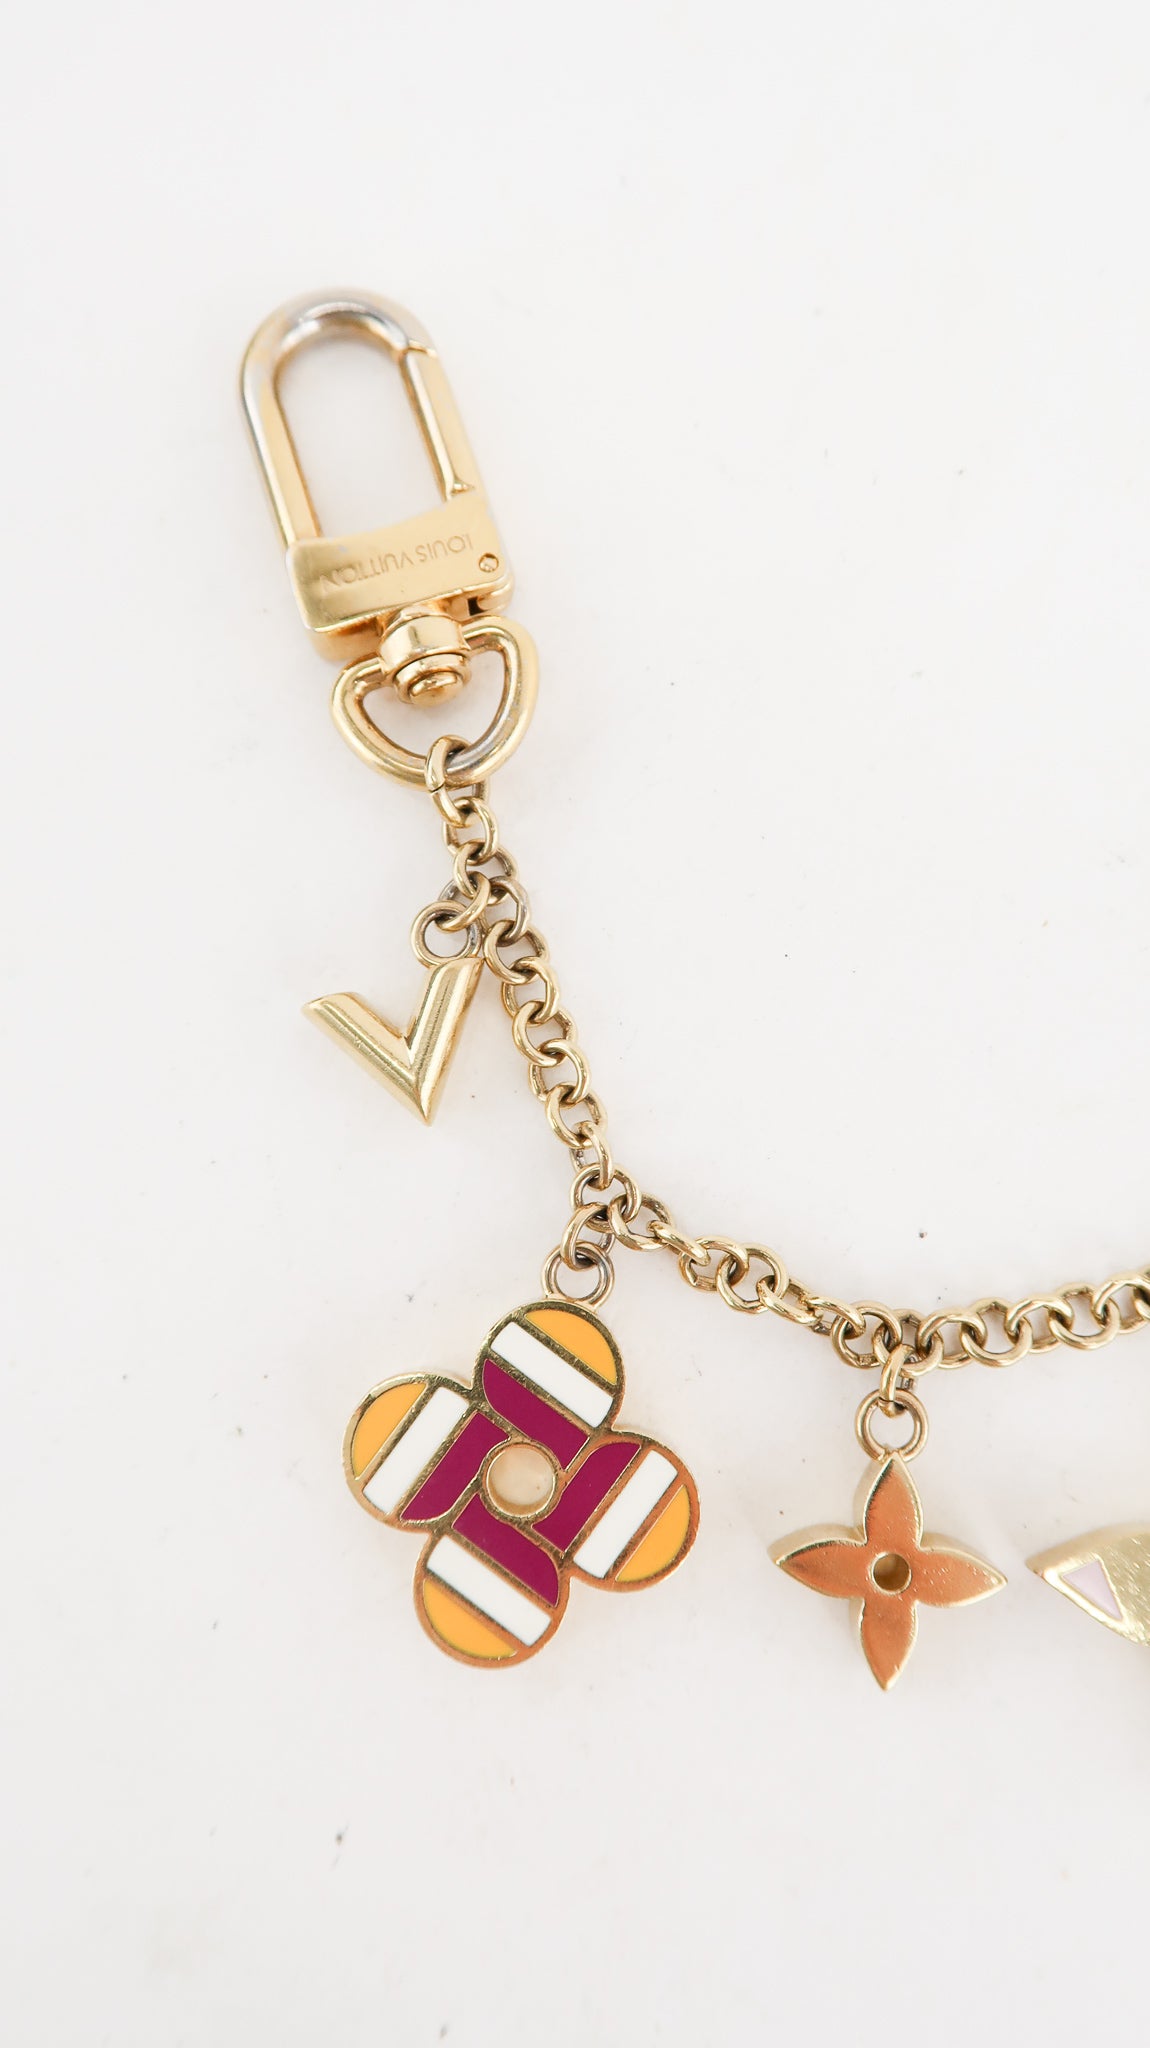 SOLD Louis Vuitton Candy Bag Charm Keychain